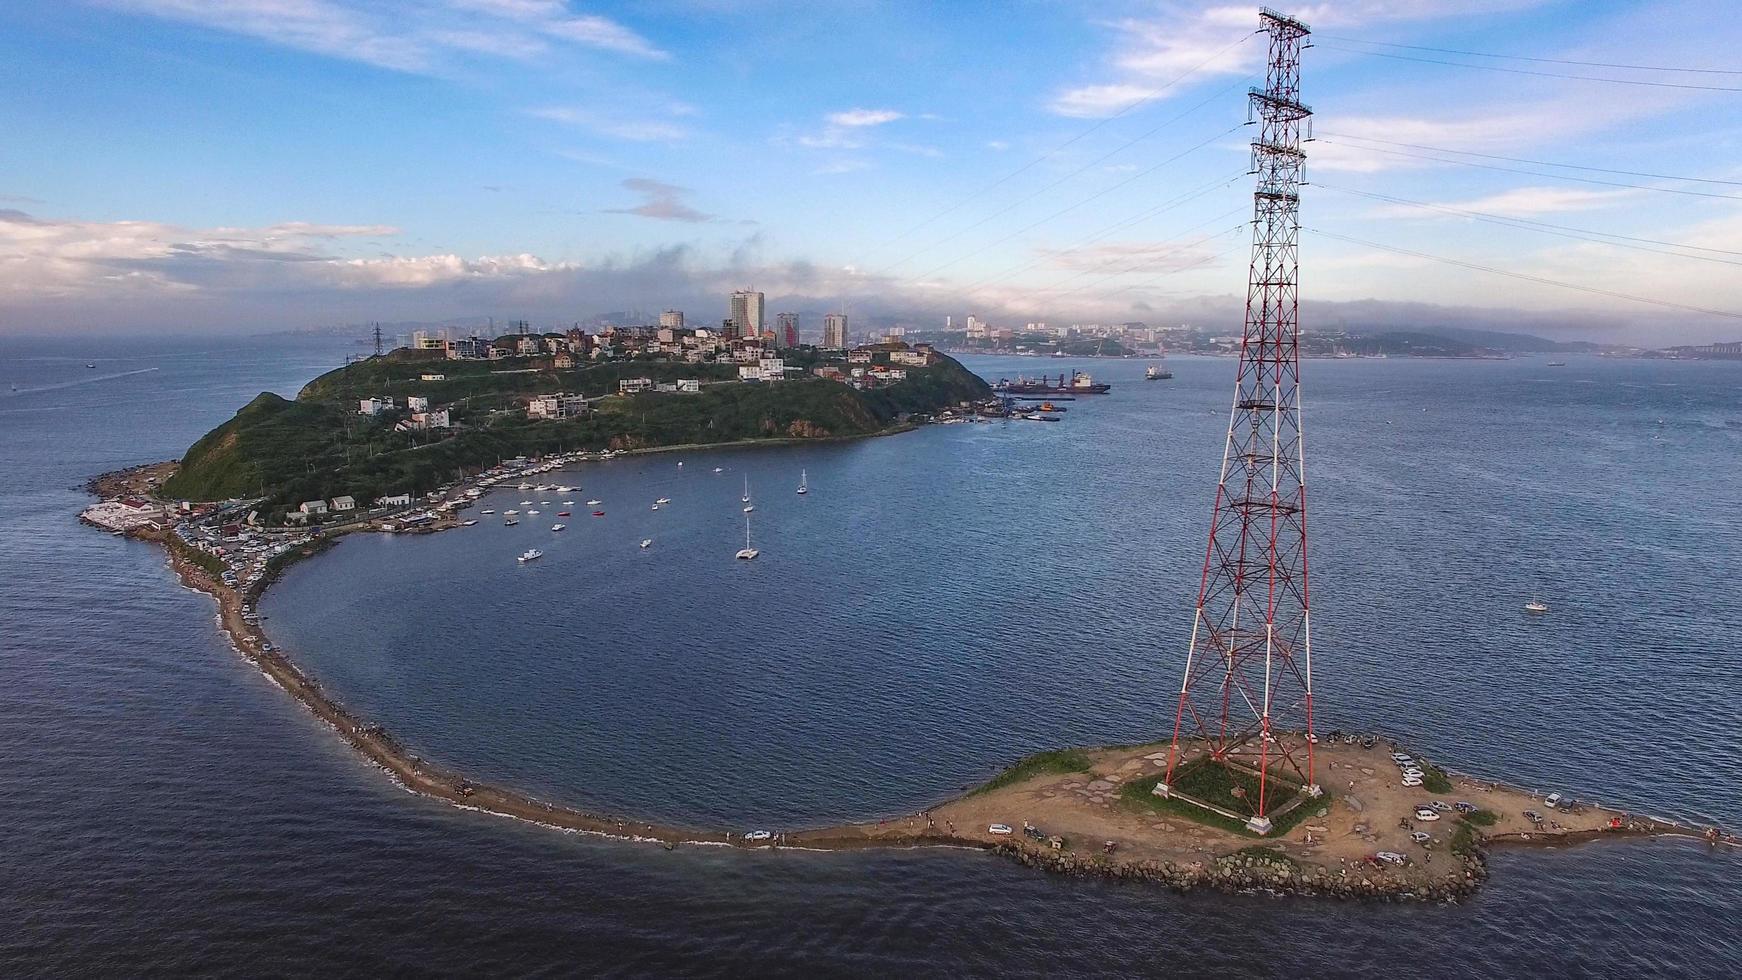 Aerial view of a seaside town and coastline in Vladivostok, Russia photo